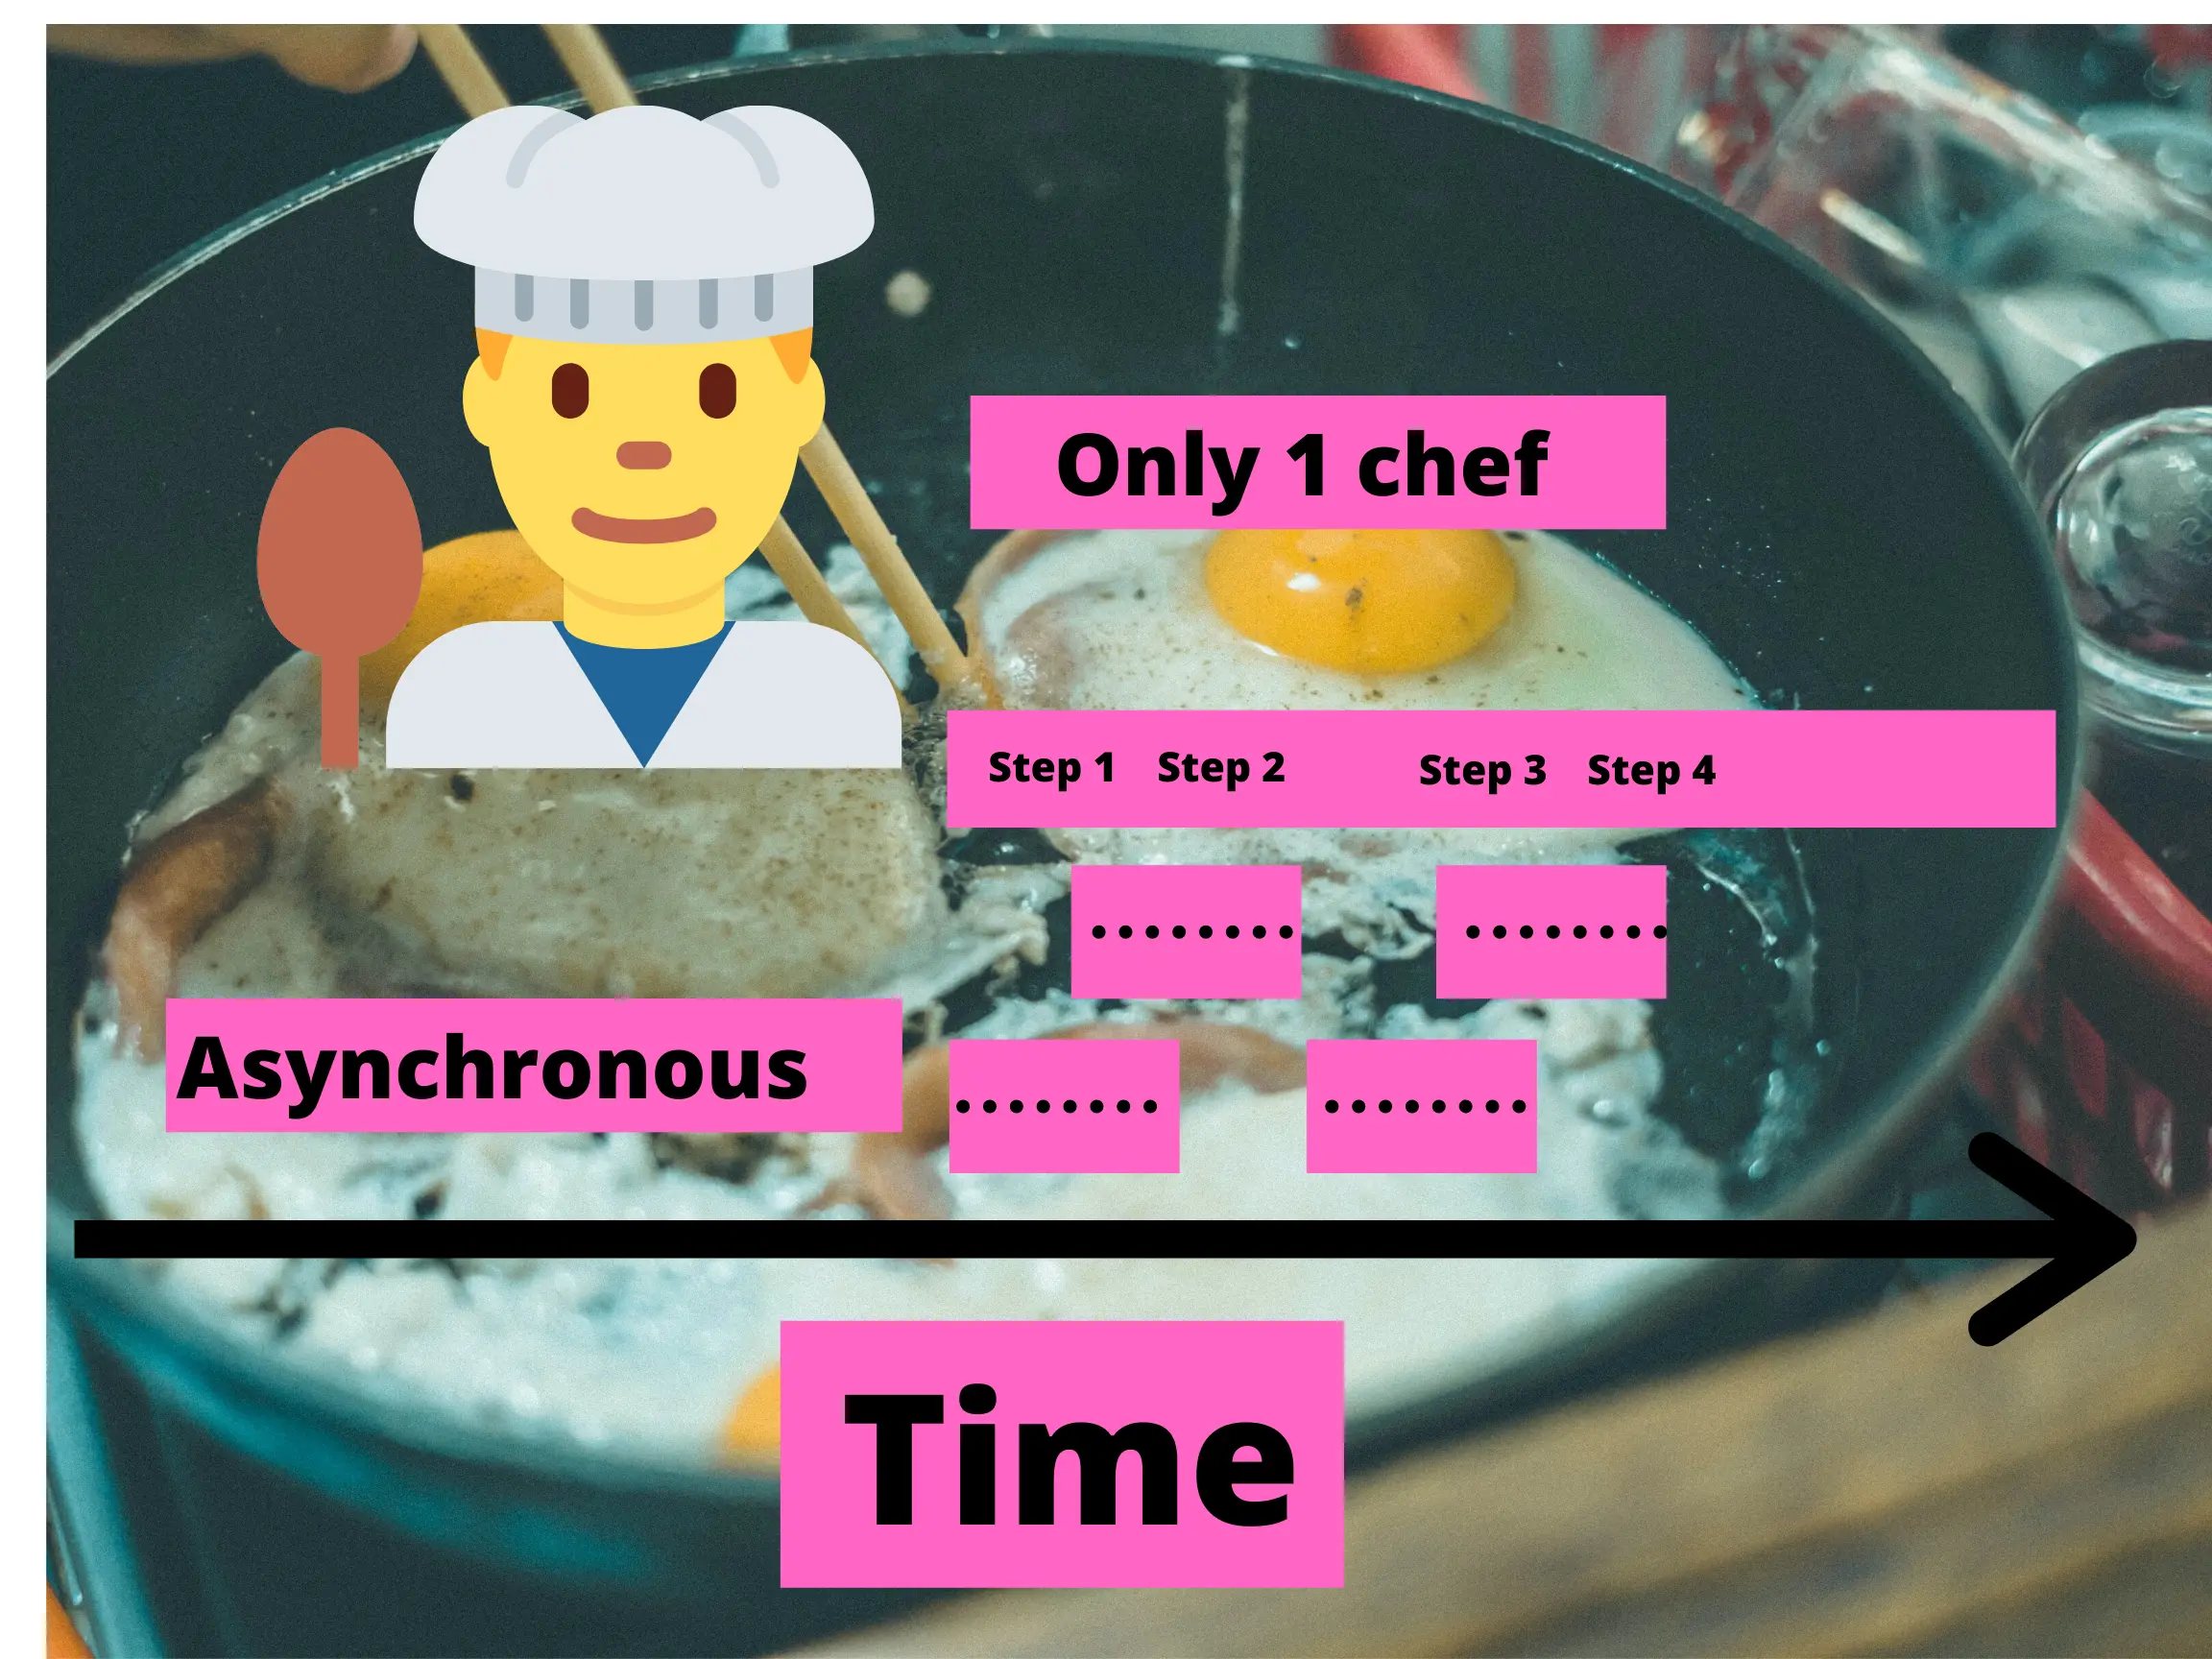 Single-threaded asynchronous way to cook breakfast